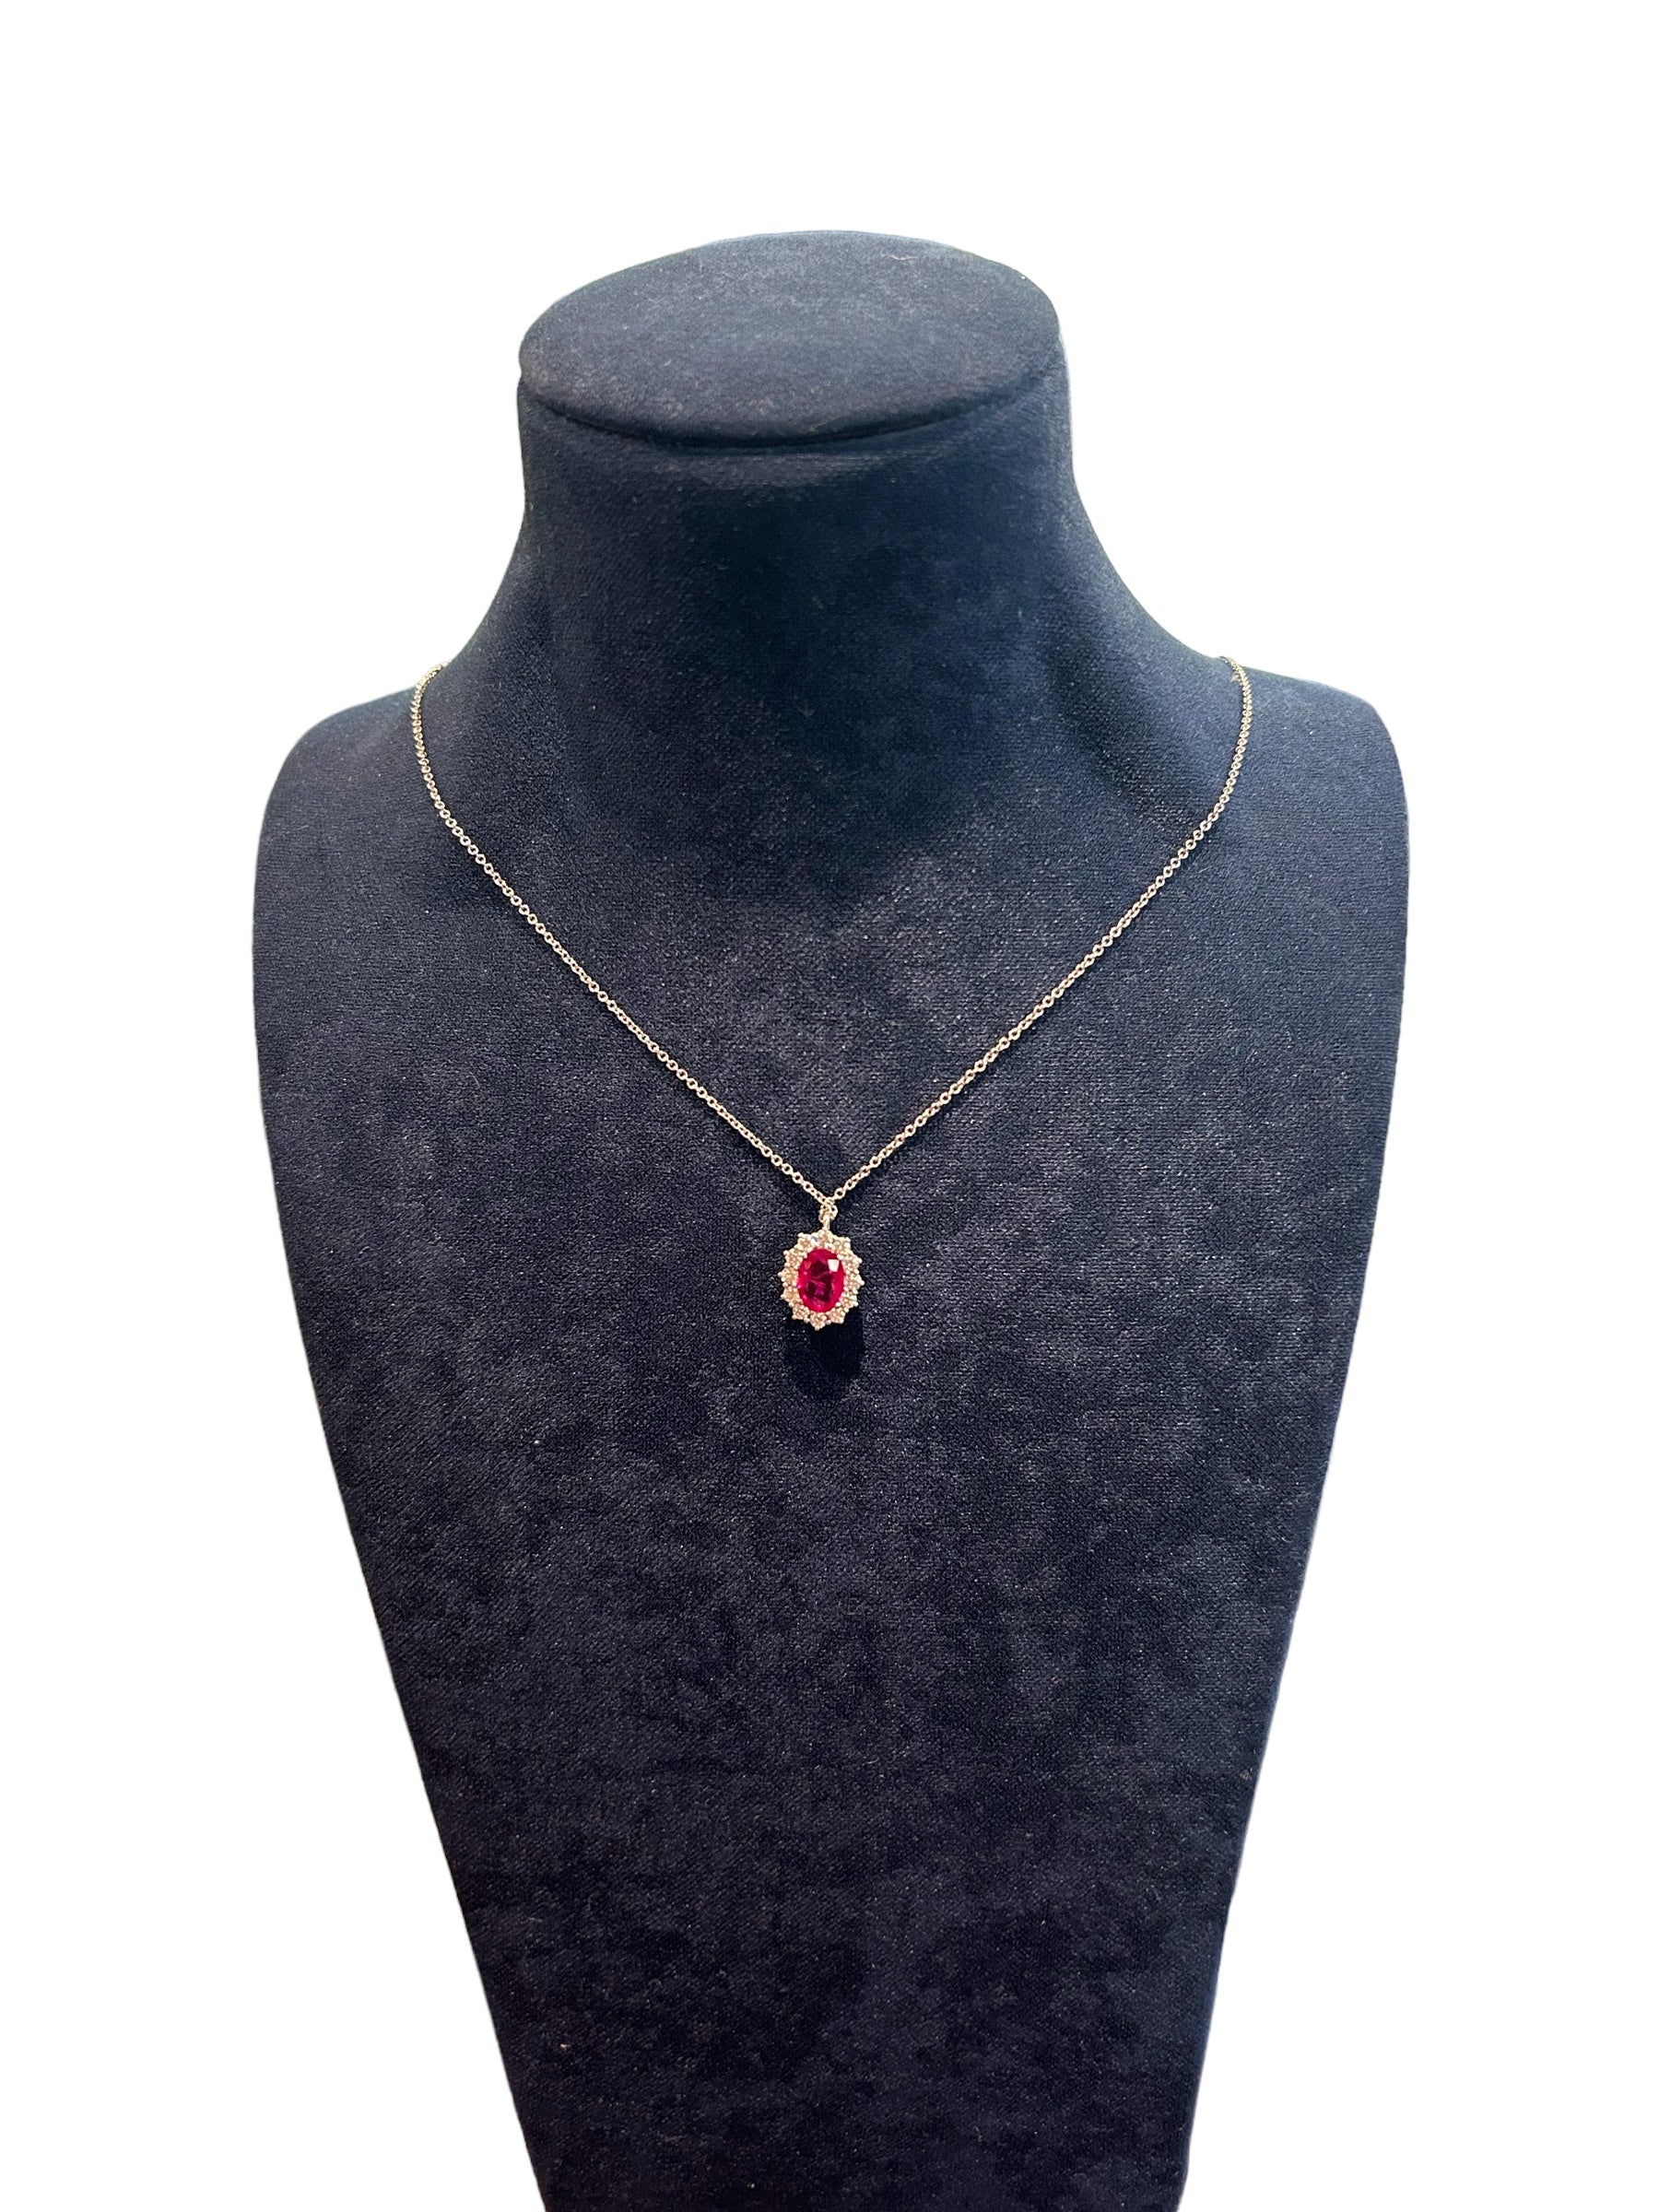 White gold necklace with diamond and ruby ​​pendant, 0.81 ct rubies - P79CC001/RB050